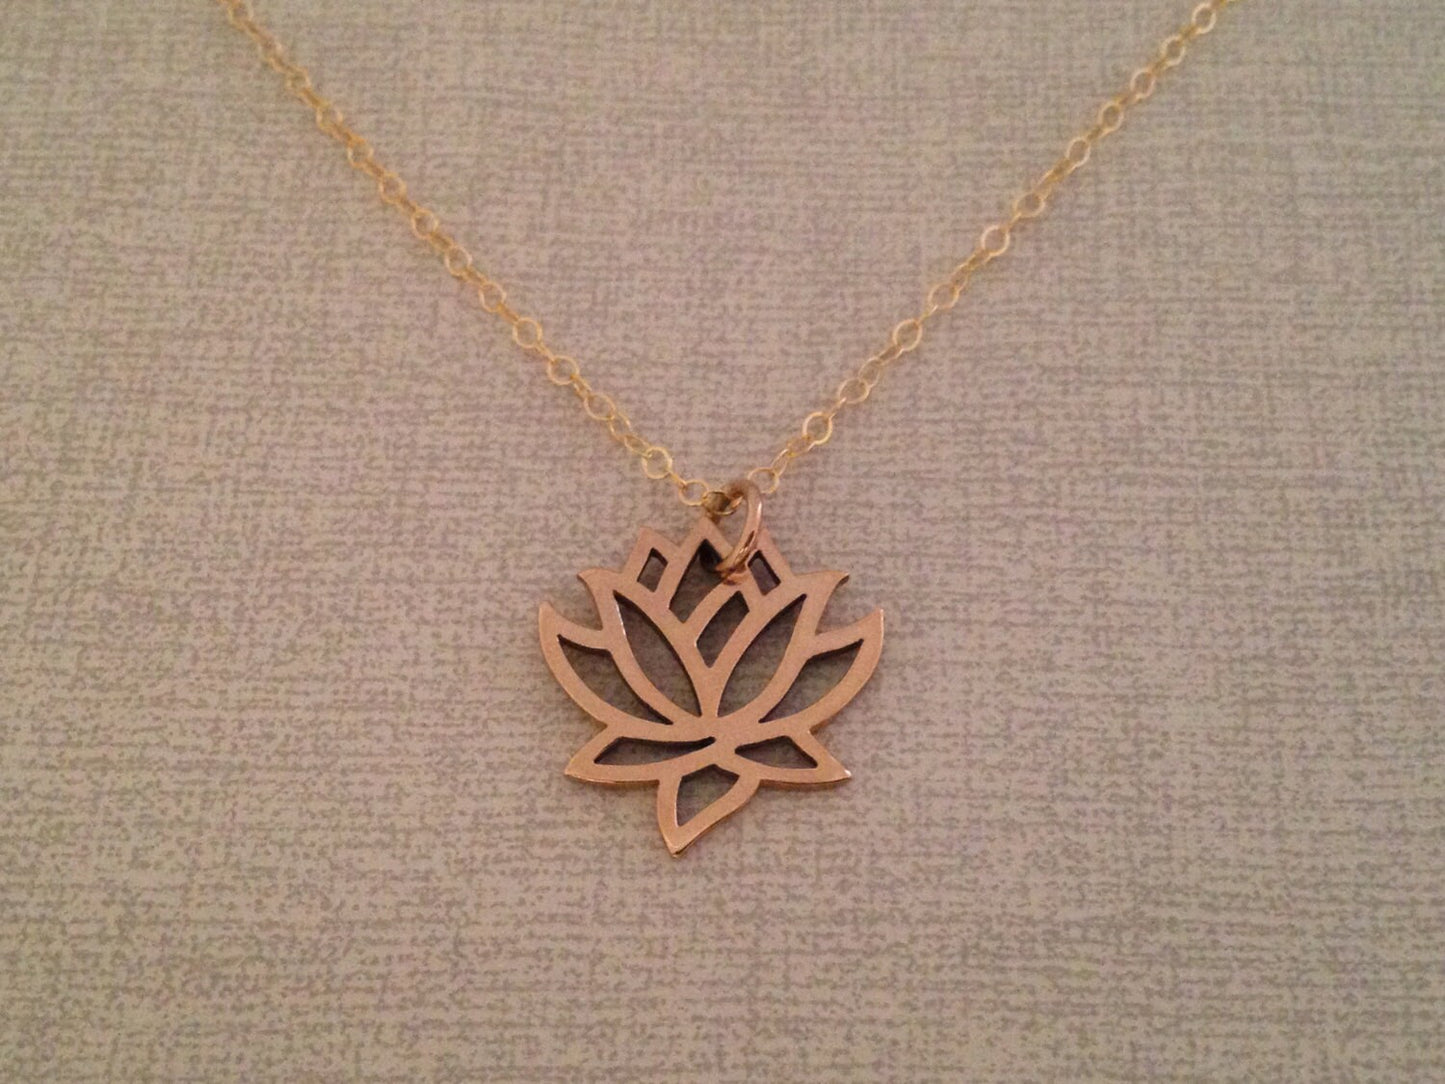 Ohm and lotus Layering Necklaces,Om Lotus layered Necklace, Yoga Jewelry, Spiritual Jewelry, layered necklace,ohm necklace,om necklace,lotus